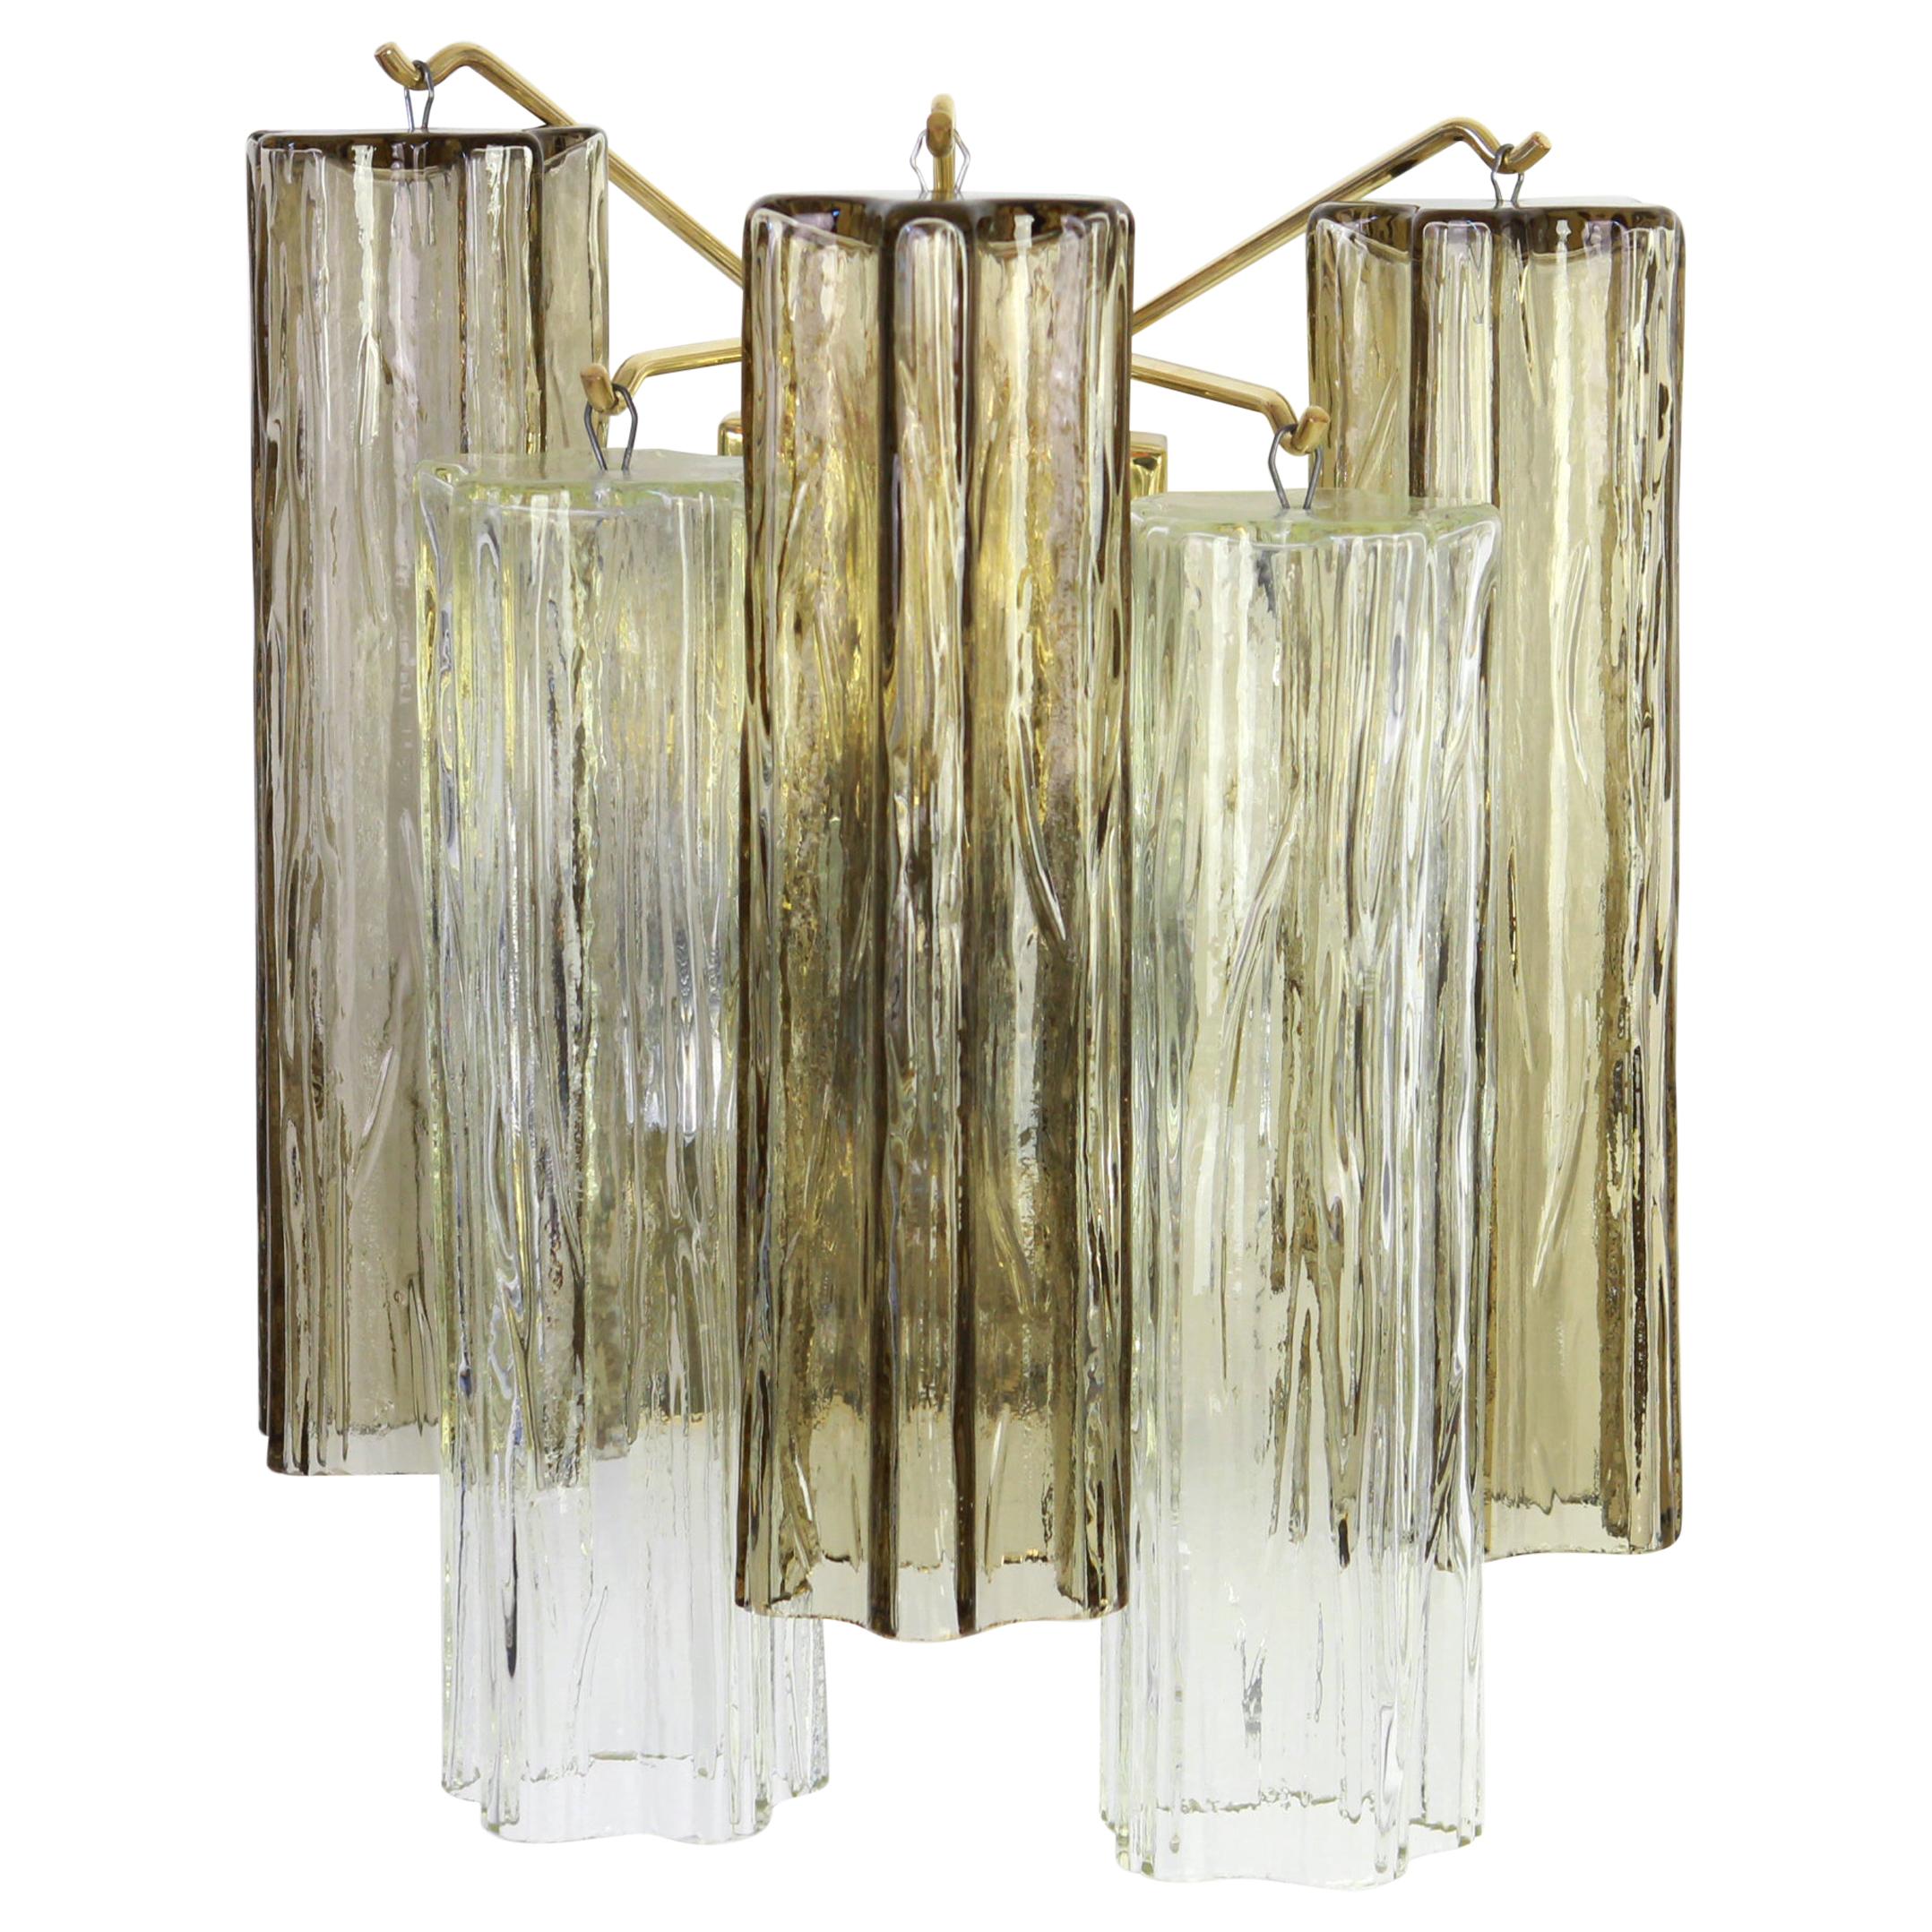 Wonderful pair of midcentury wall sconces with three large Murano glass pieces on a brass frame in each wall lamp, designed by Venini and made by Kalmar, Austria, manufactured, circa 1960-1969.
Each sconce needs two x E27 standard bulbs and they